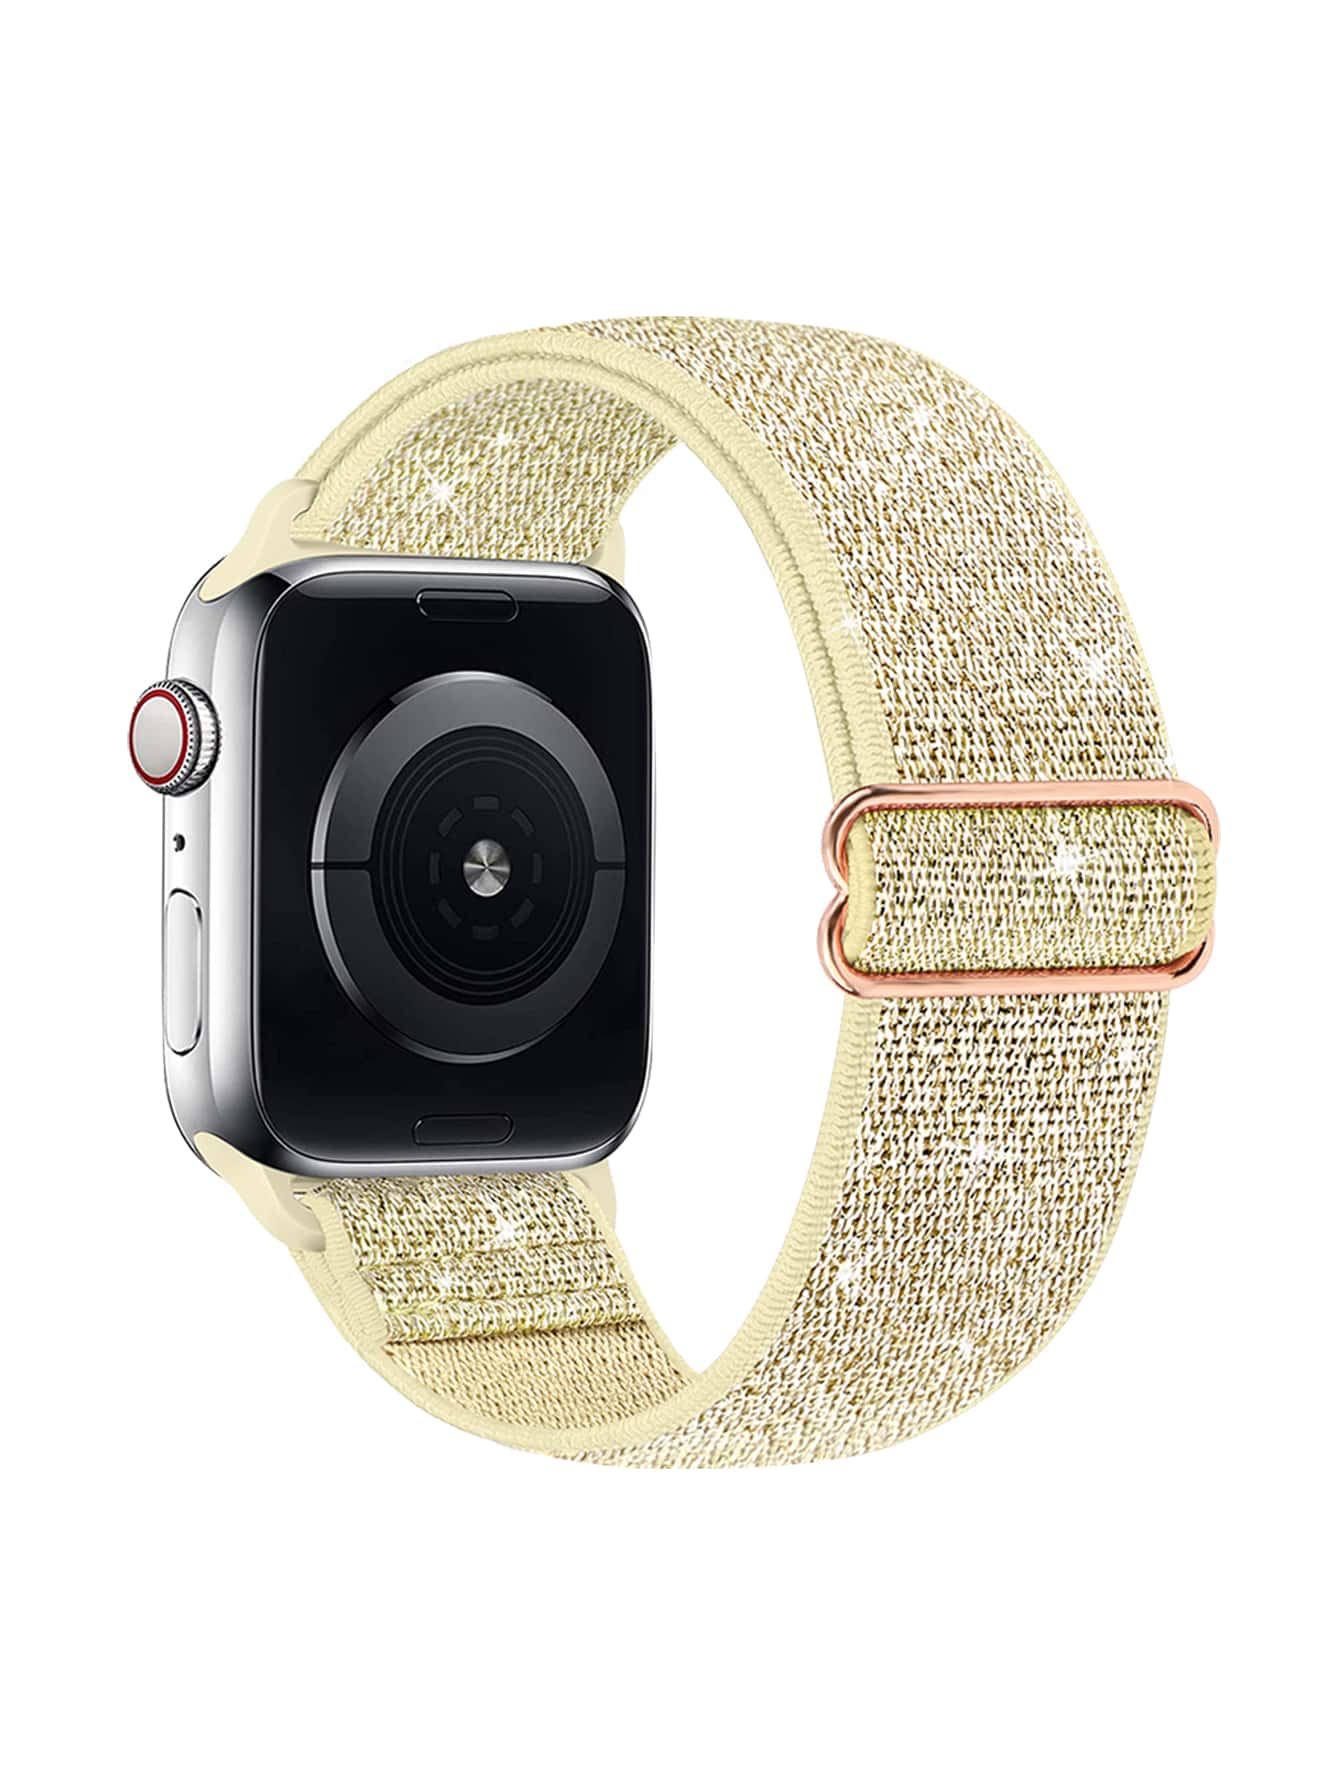 Pink Blingbling Bright Color Smart Watch Band Compatible With Apple, Samsung And Fitbit